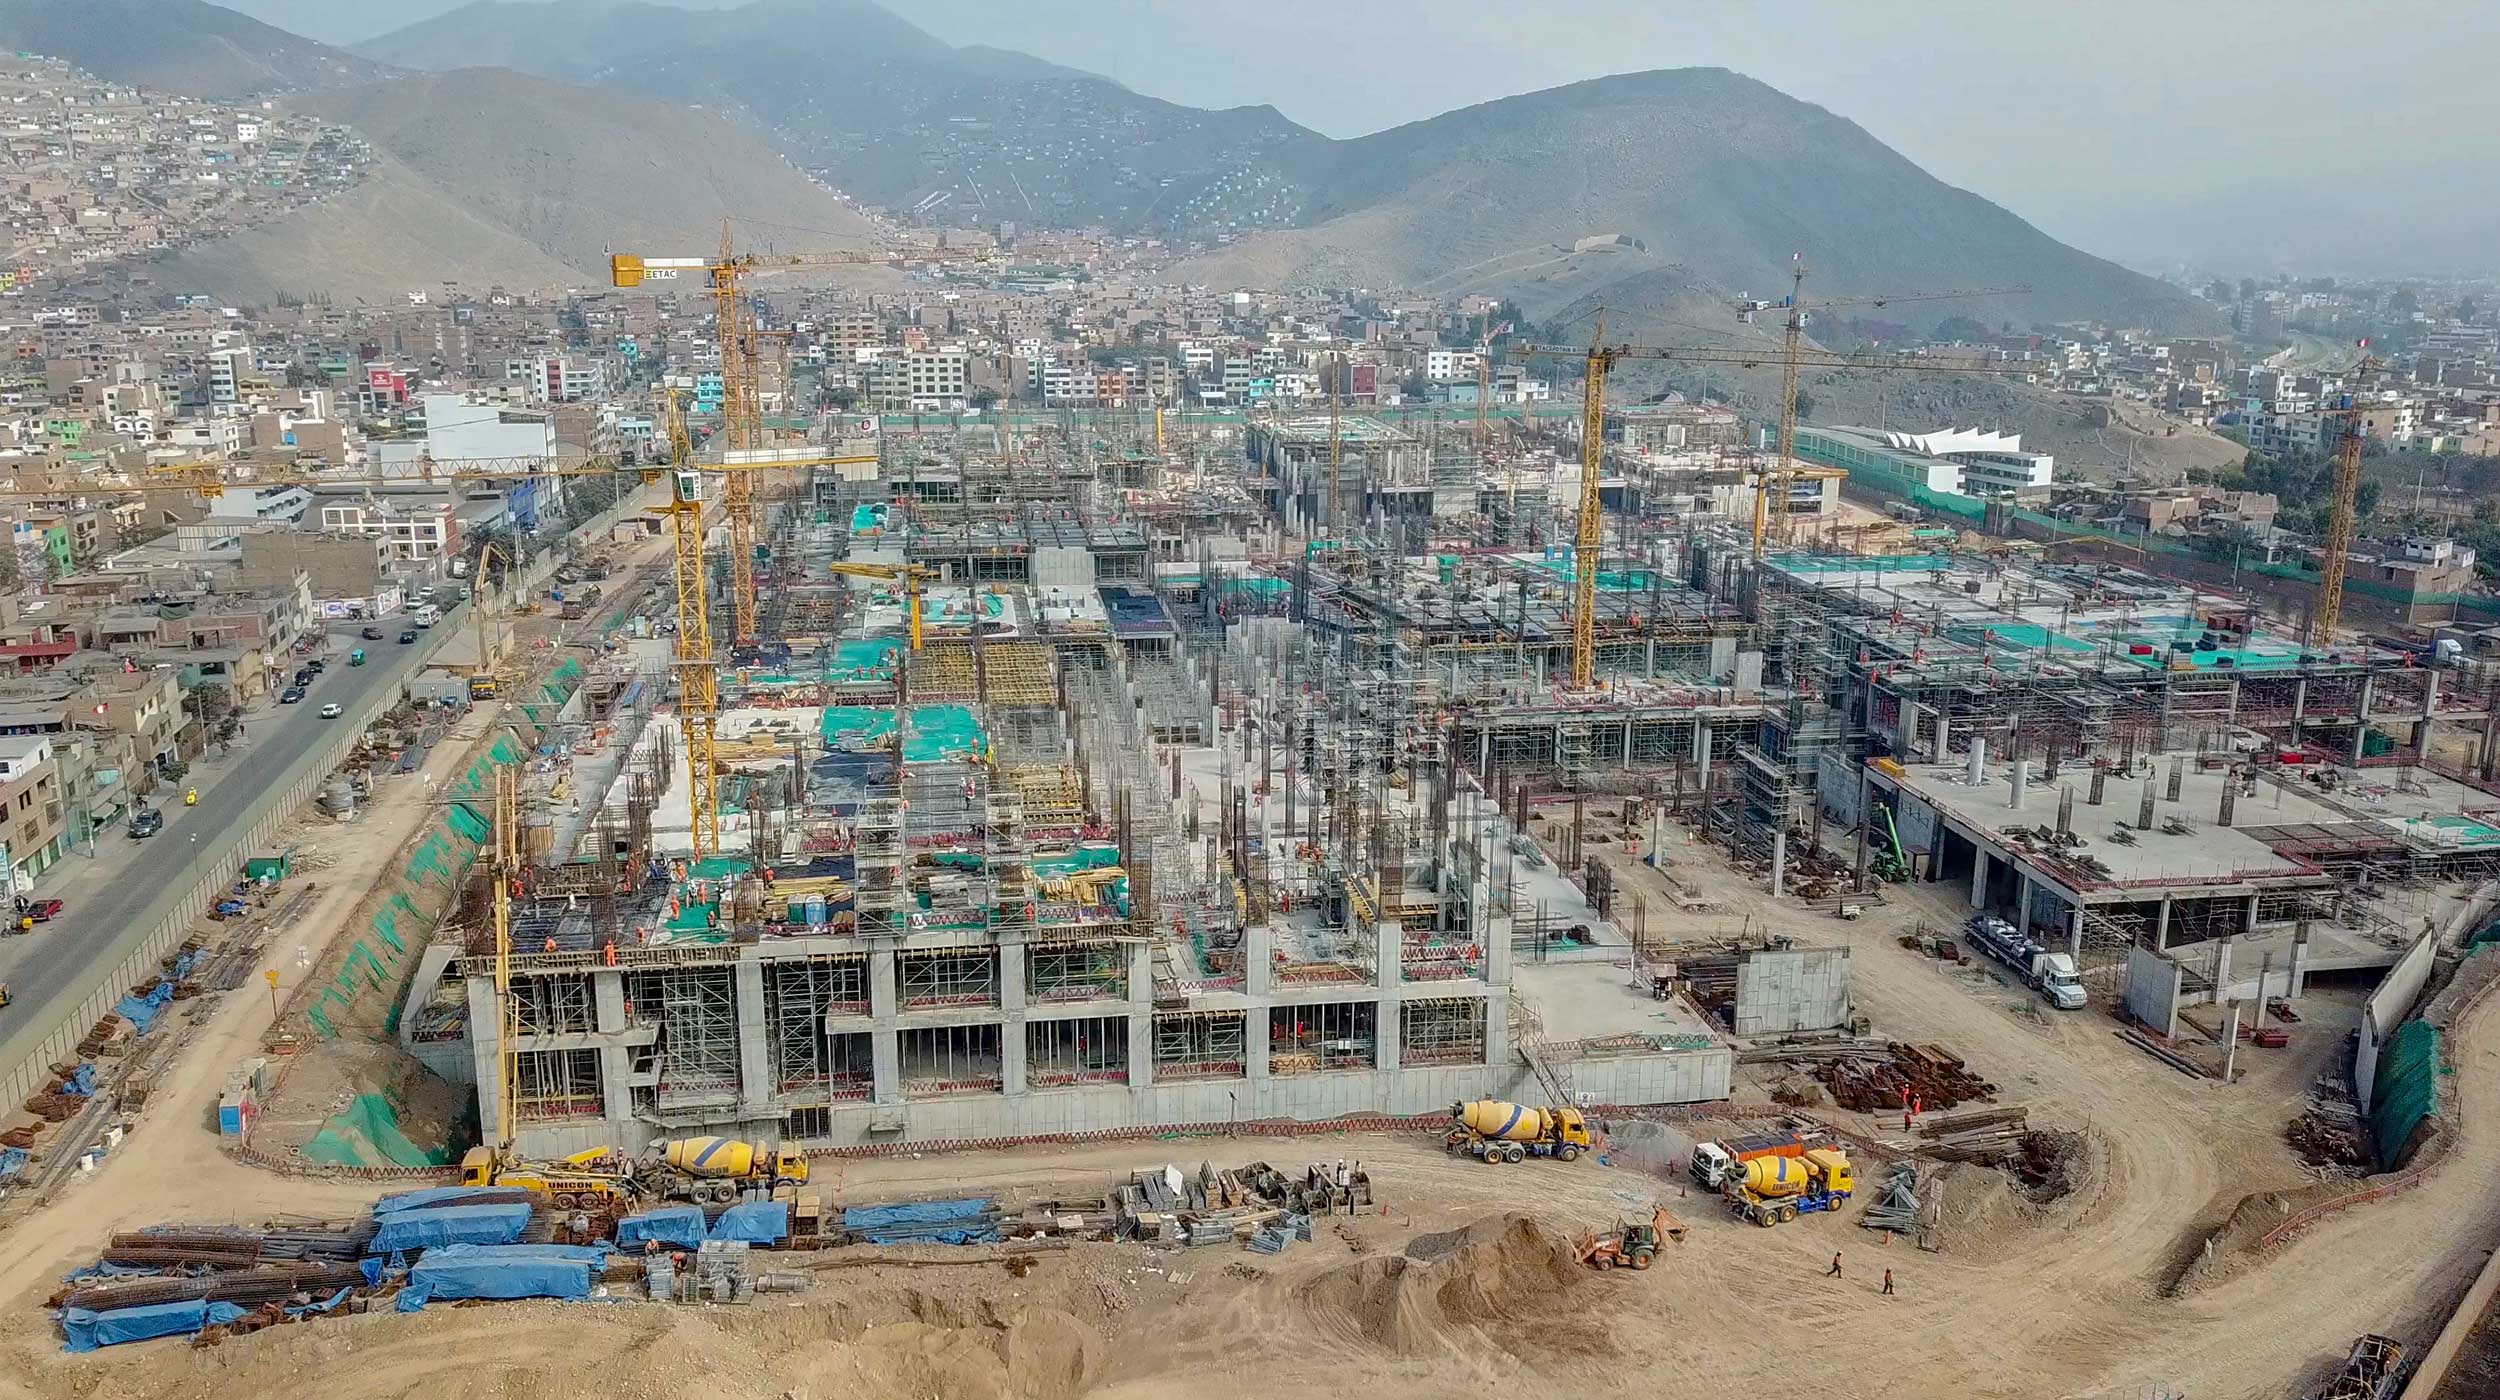 ULMA is collaborating in the construction of the Real Plaza de Puruchuco Shopping Centre, one of the largest shopping centres in Peru covering approximately 230,000 square metres.